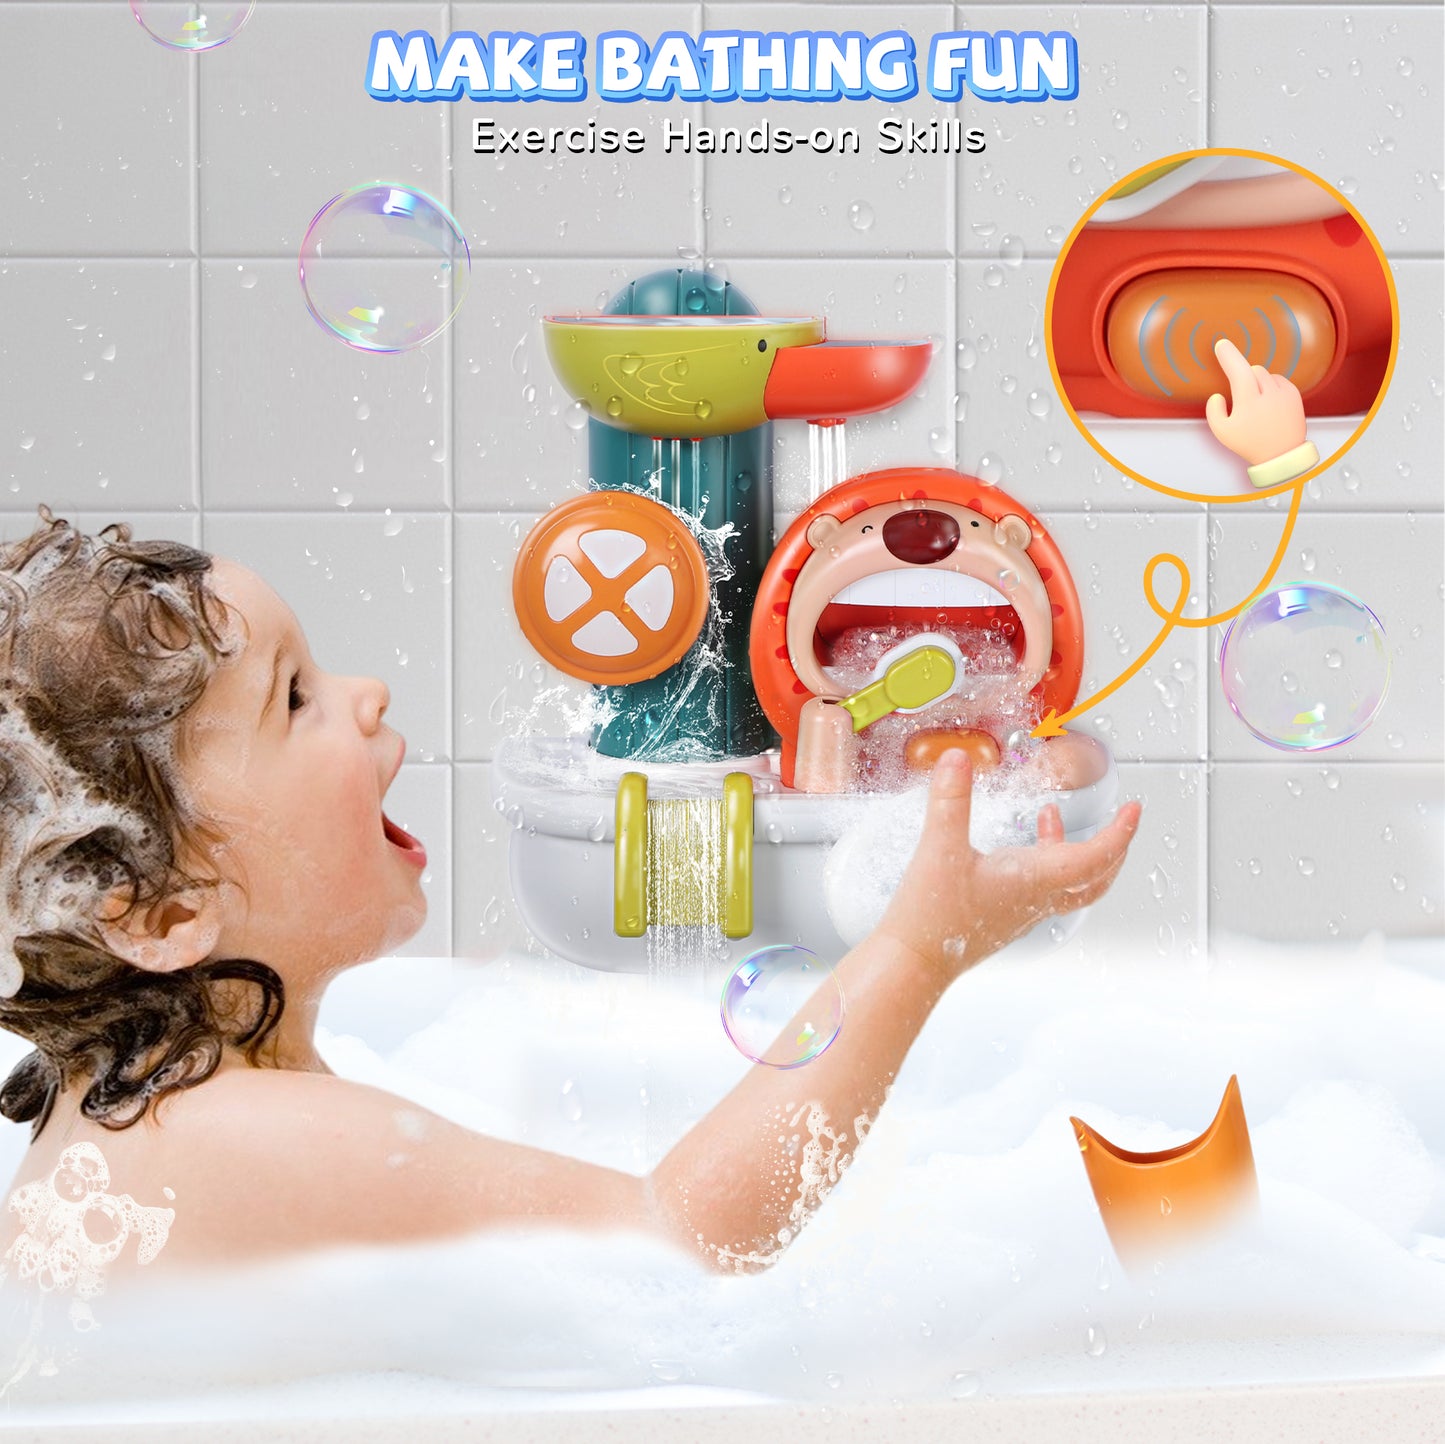 Vomeast Bath Toys, Baby Bubble Bath, Lion Bathtub Toys for Baby and Toddler, Boys Girls Gifts